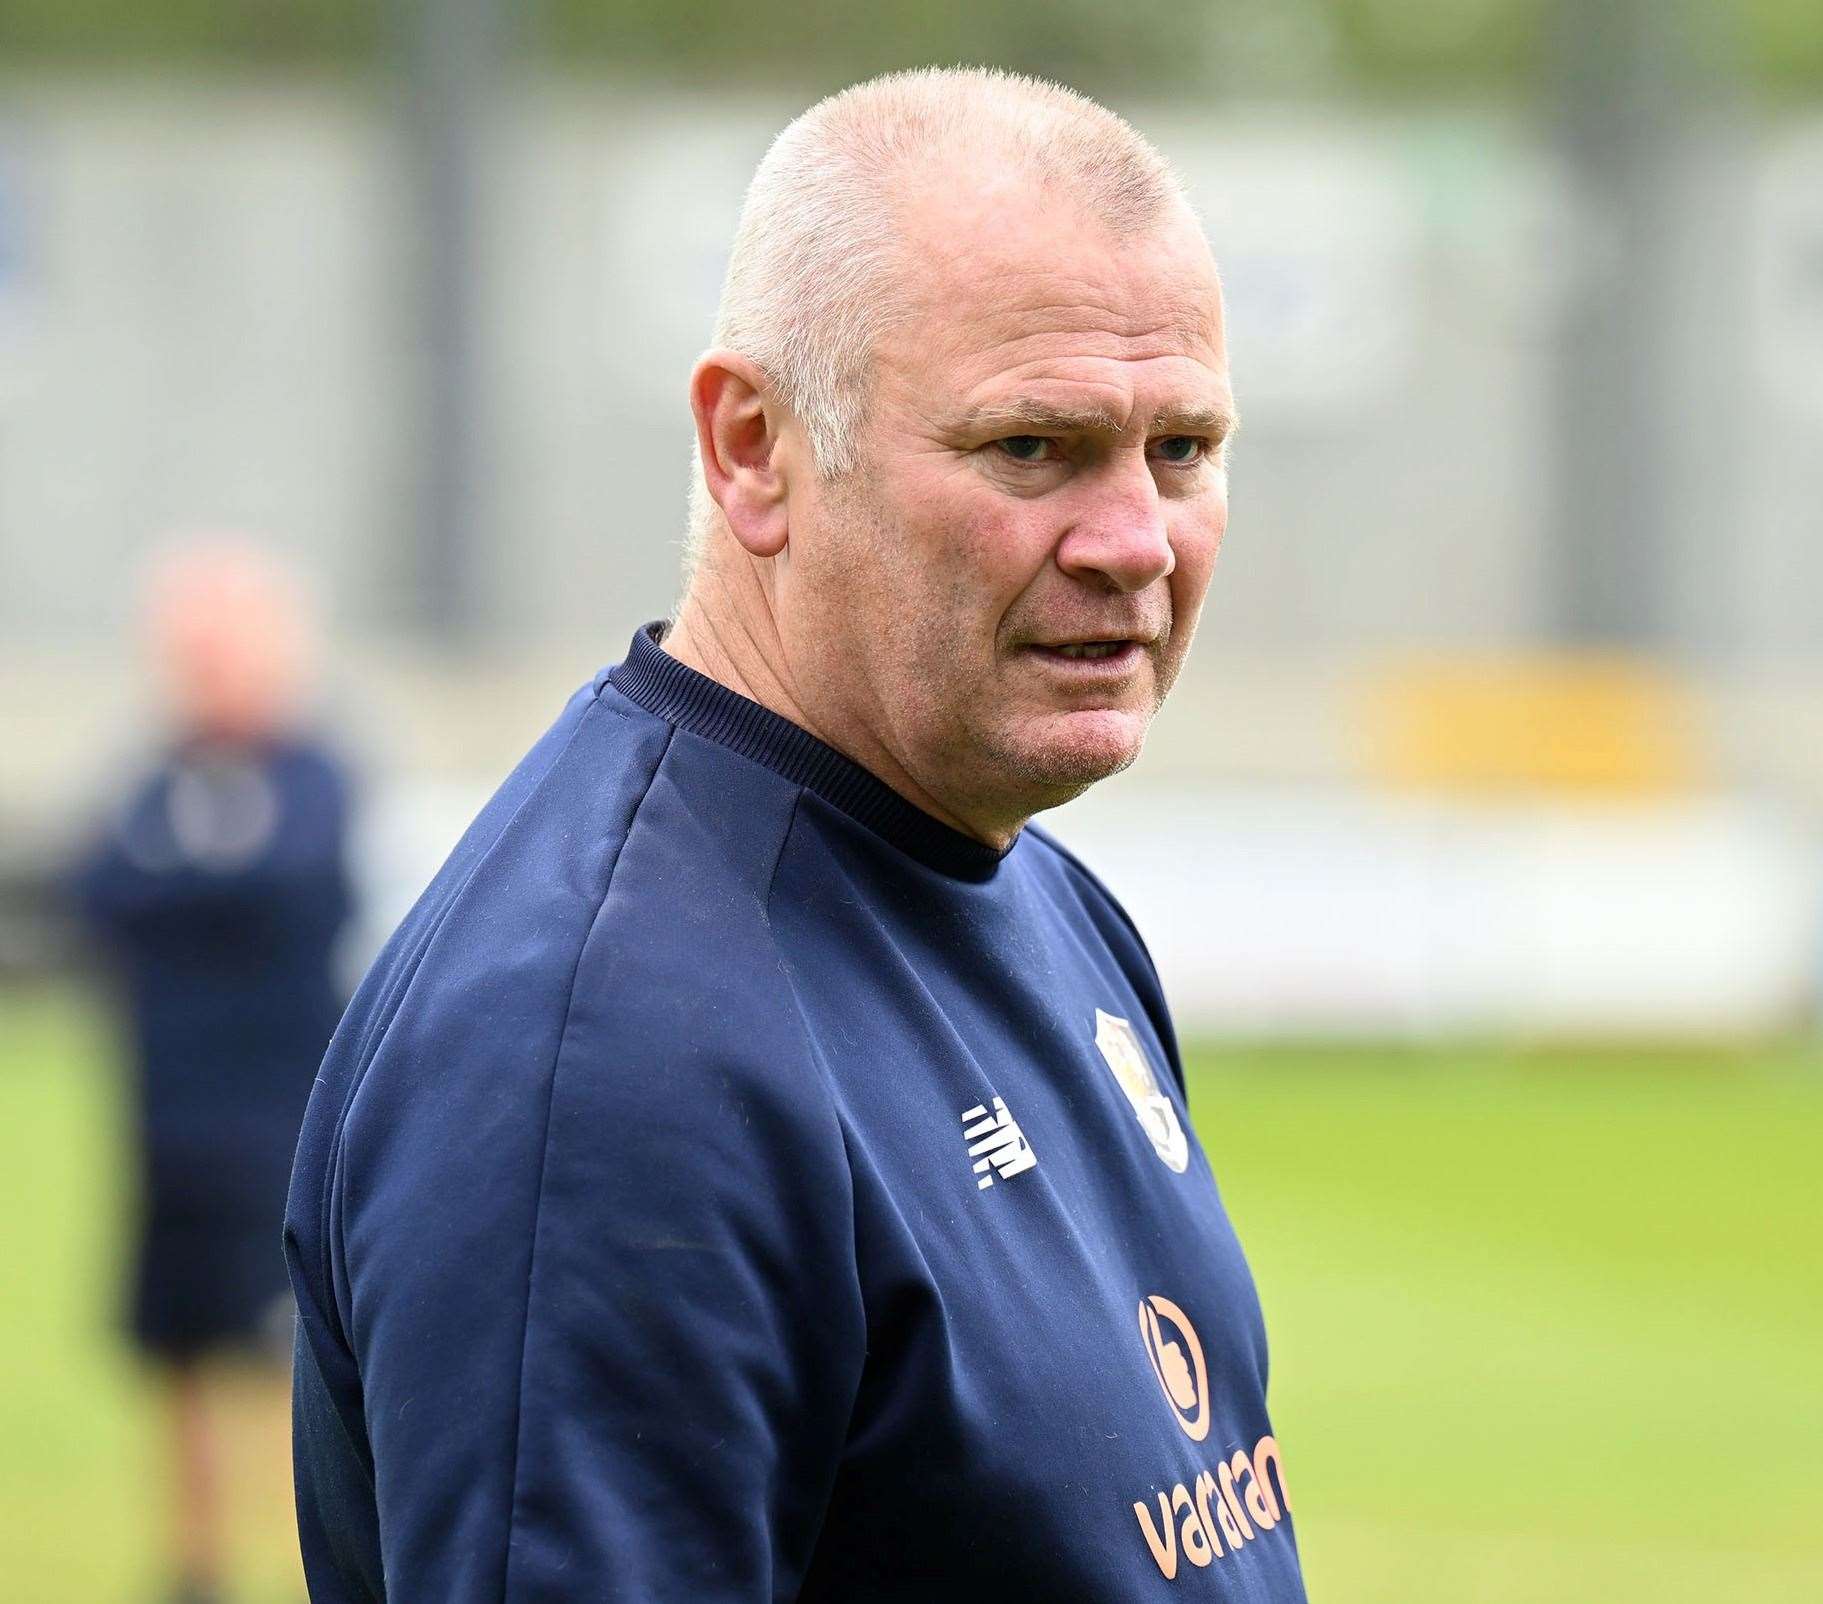 Alan Dowson says it’s a pleasure working with the board at Dartford. Picture: Keith Gillard